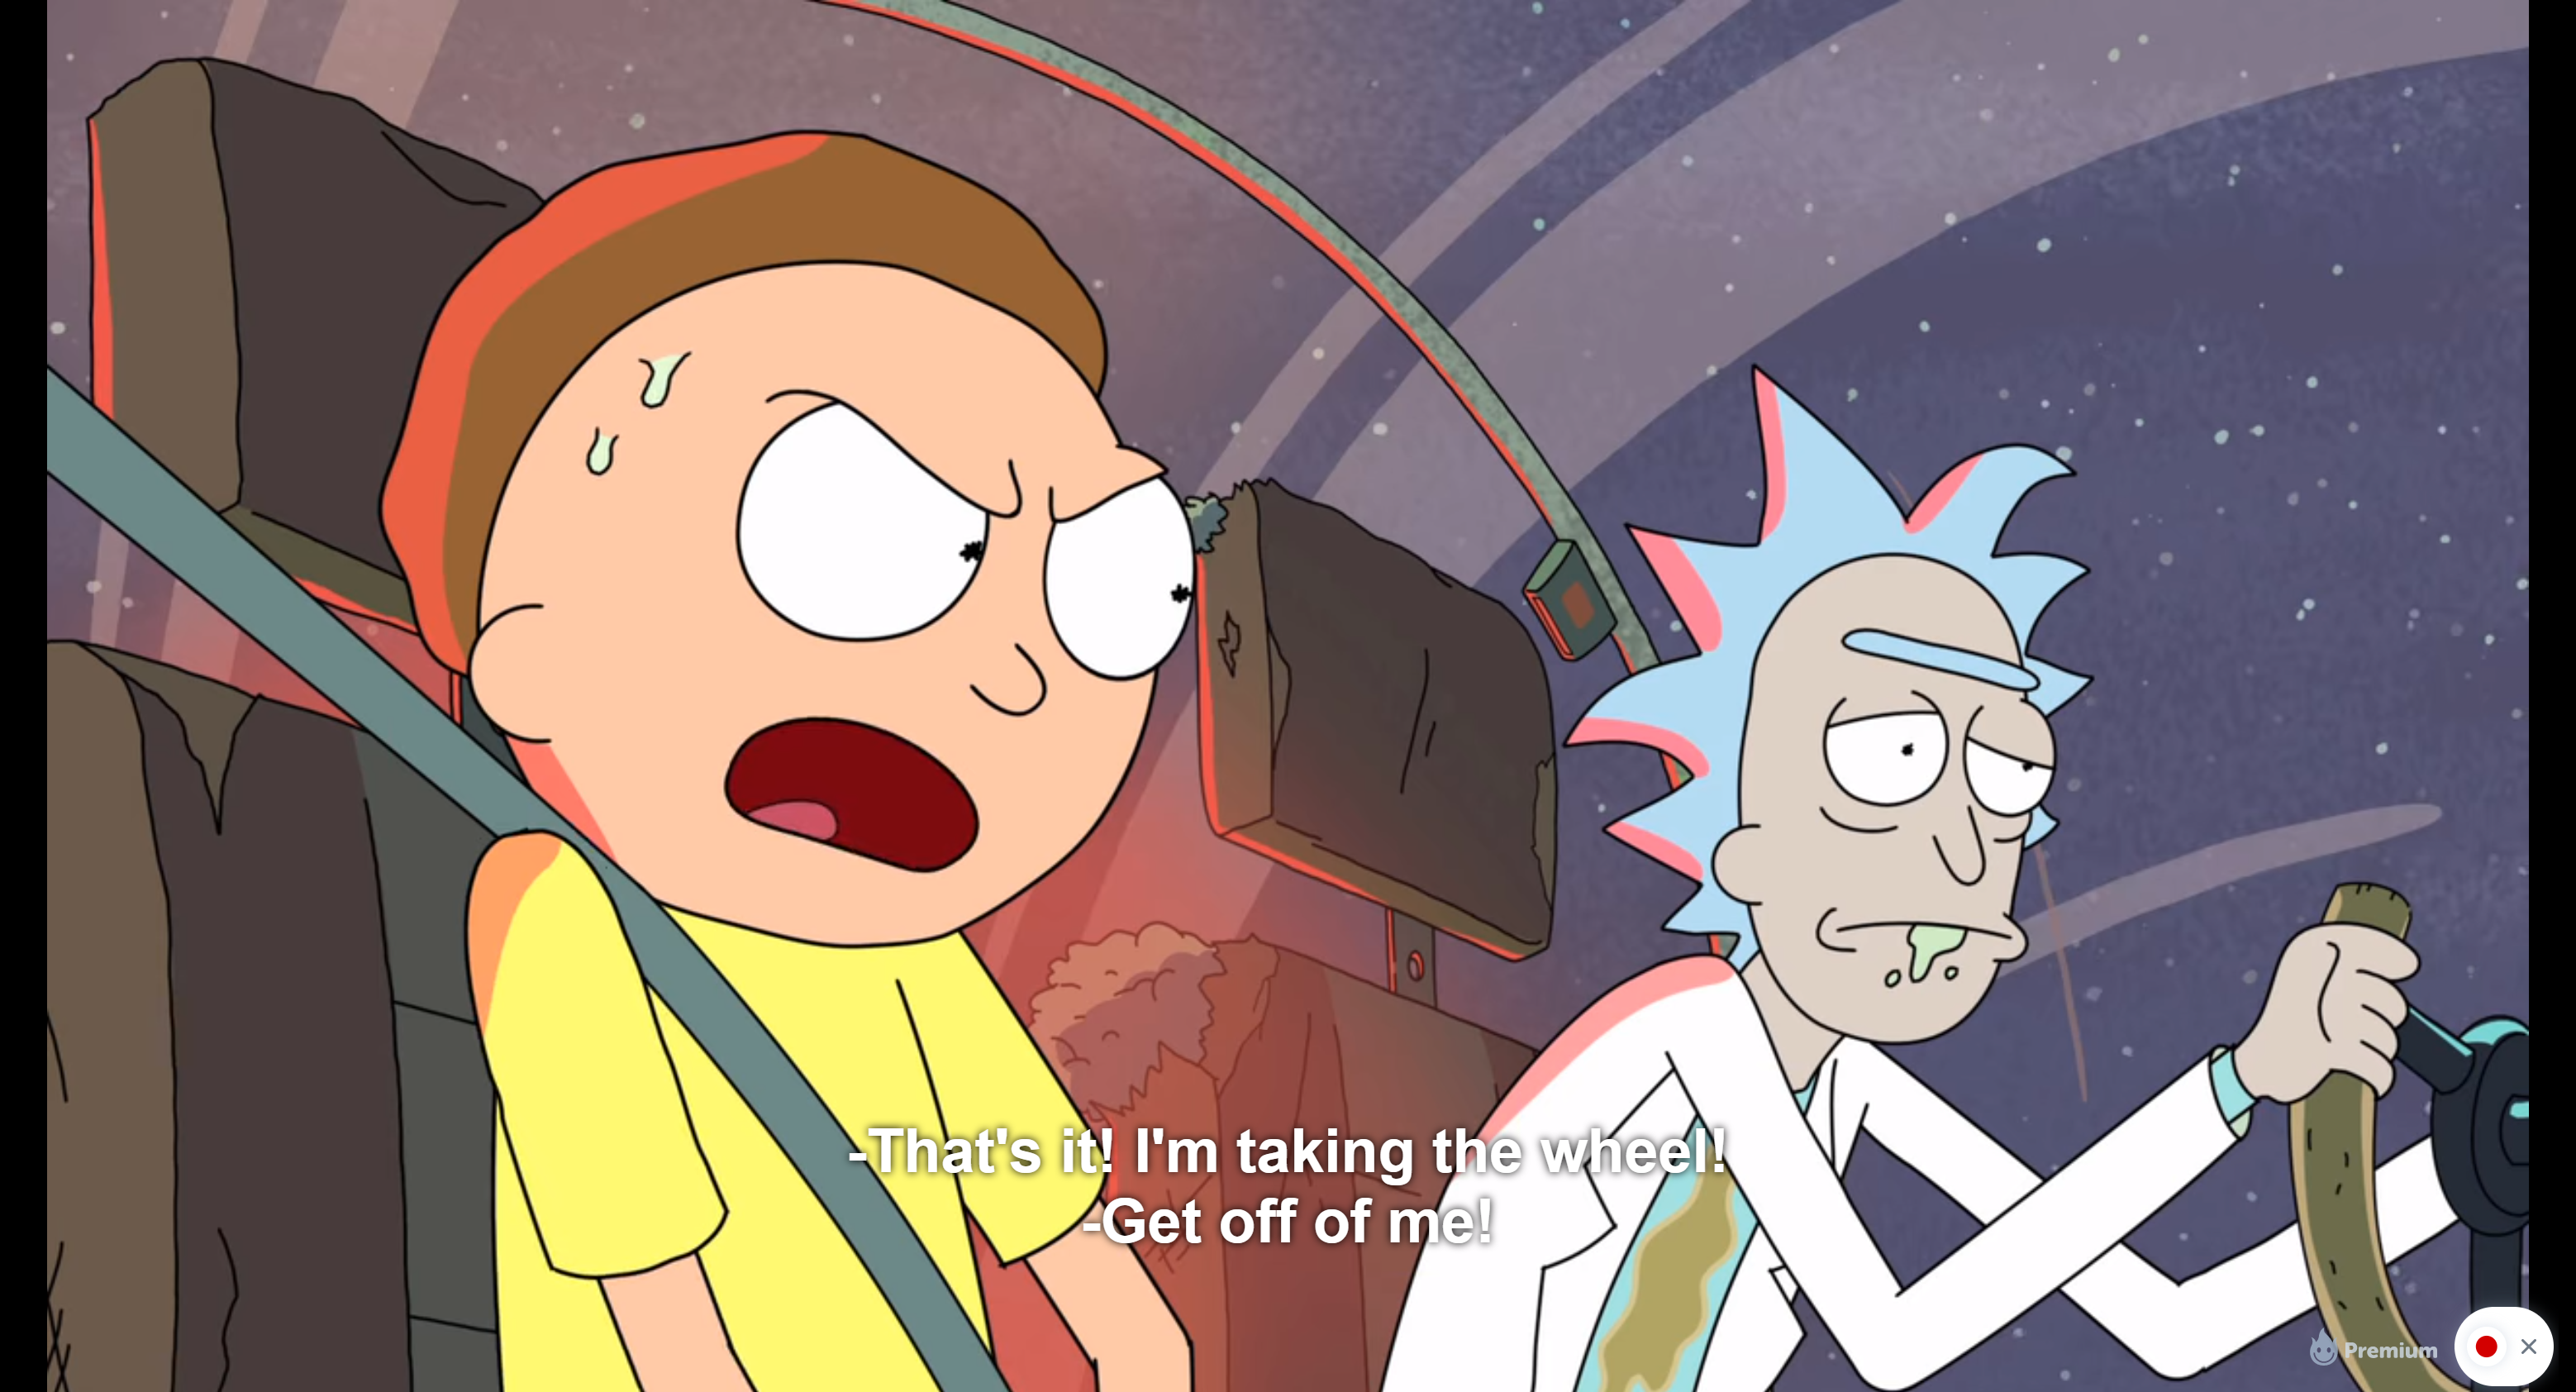 Subtitles for Rick and Morty on Netflix